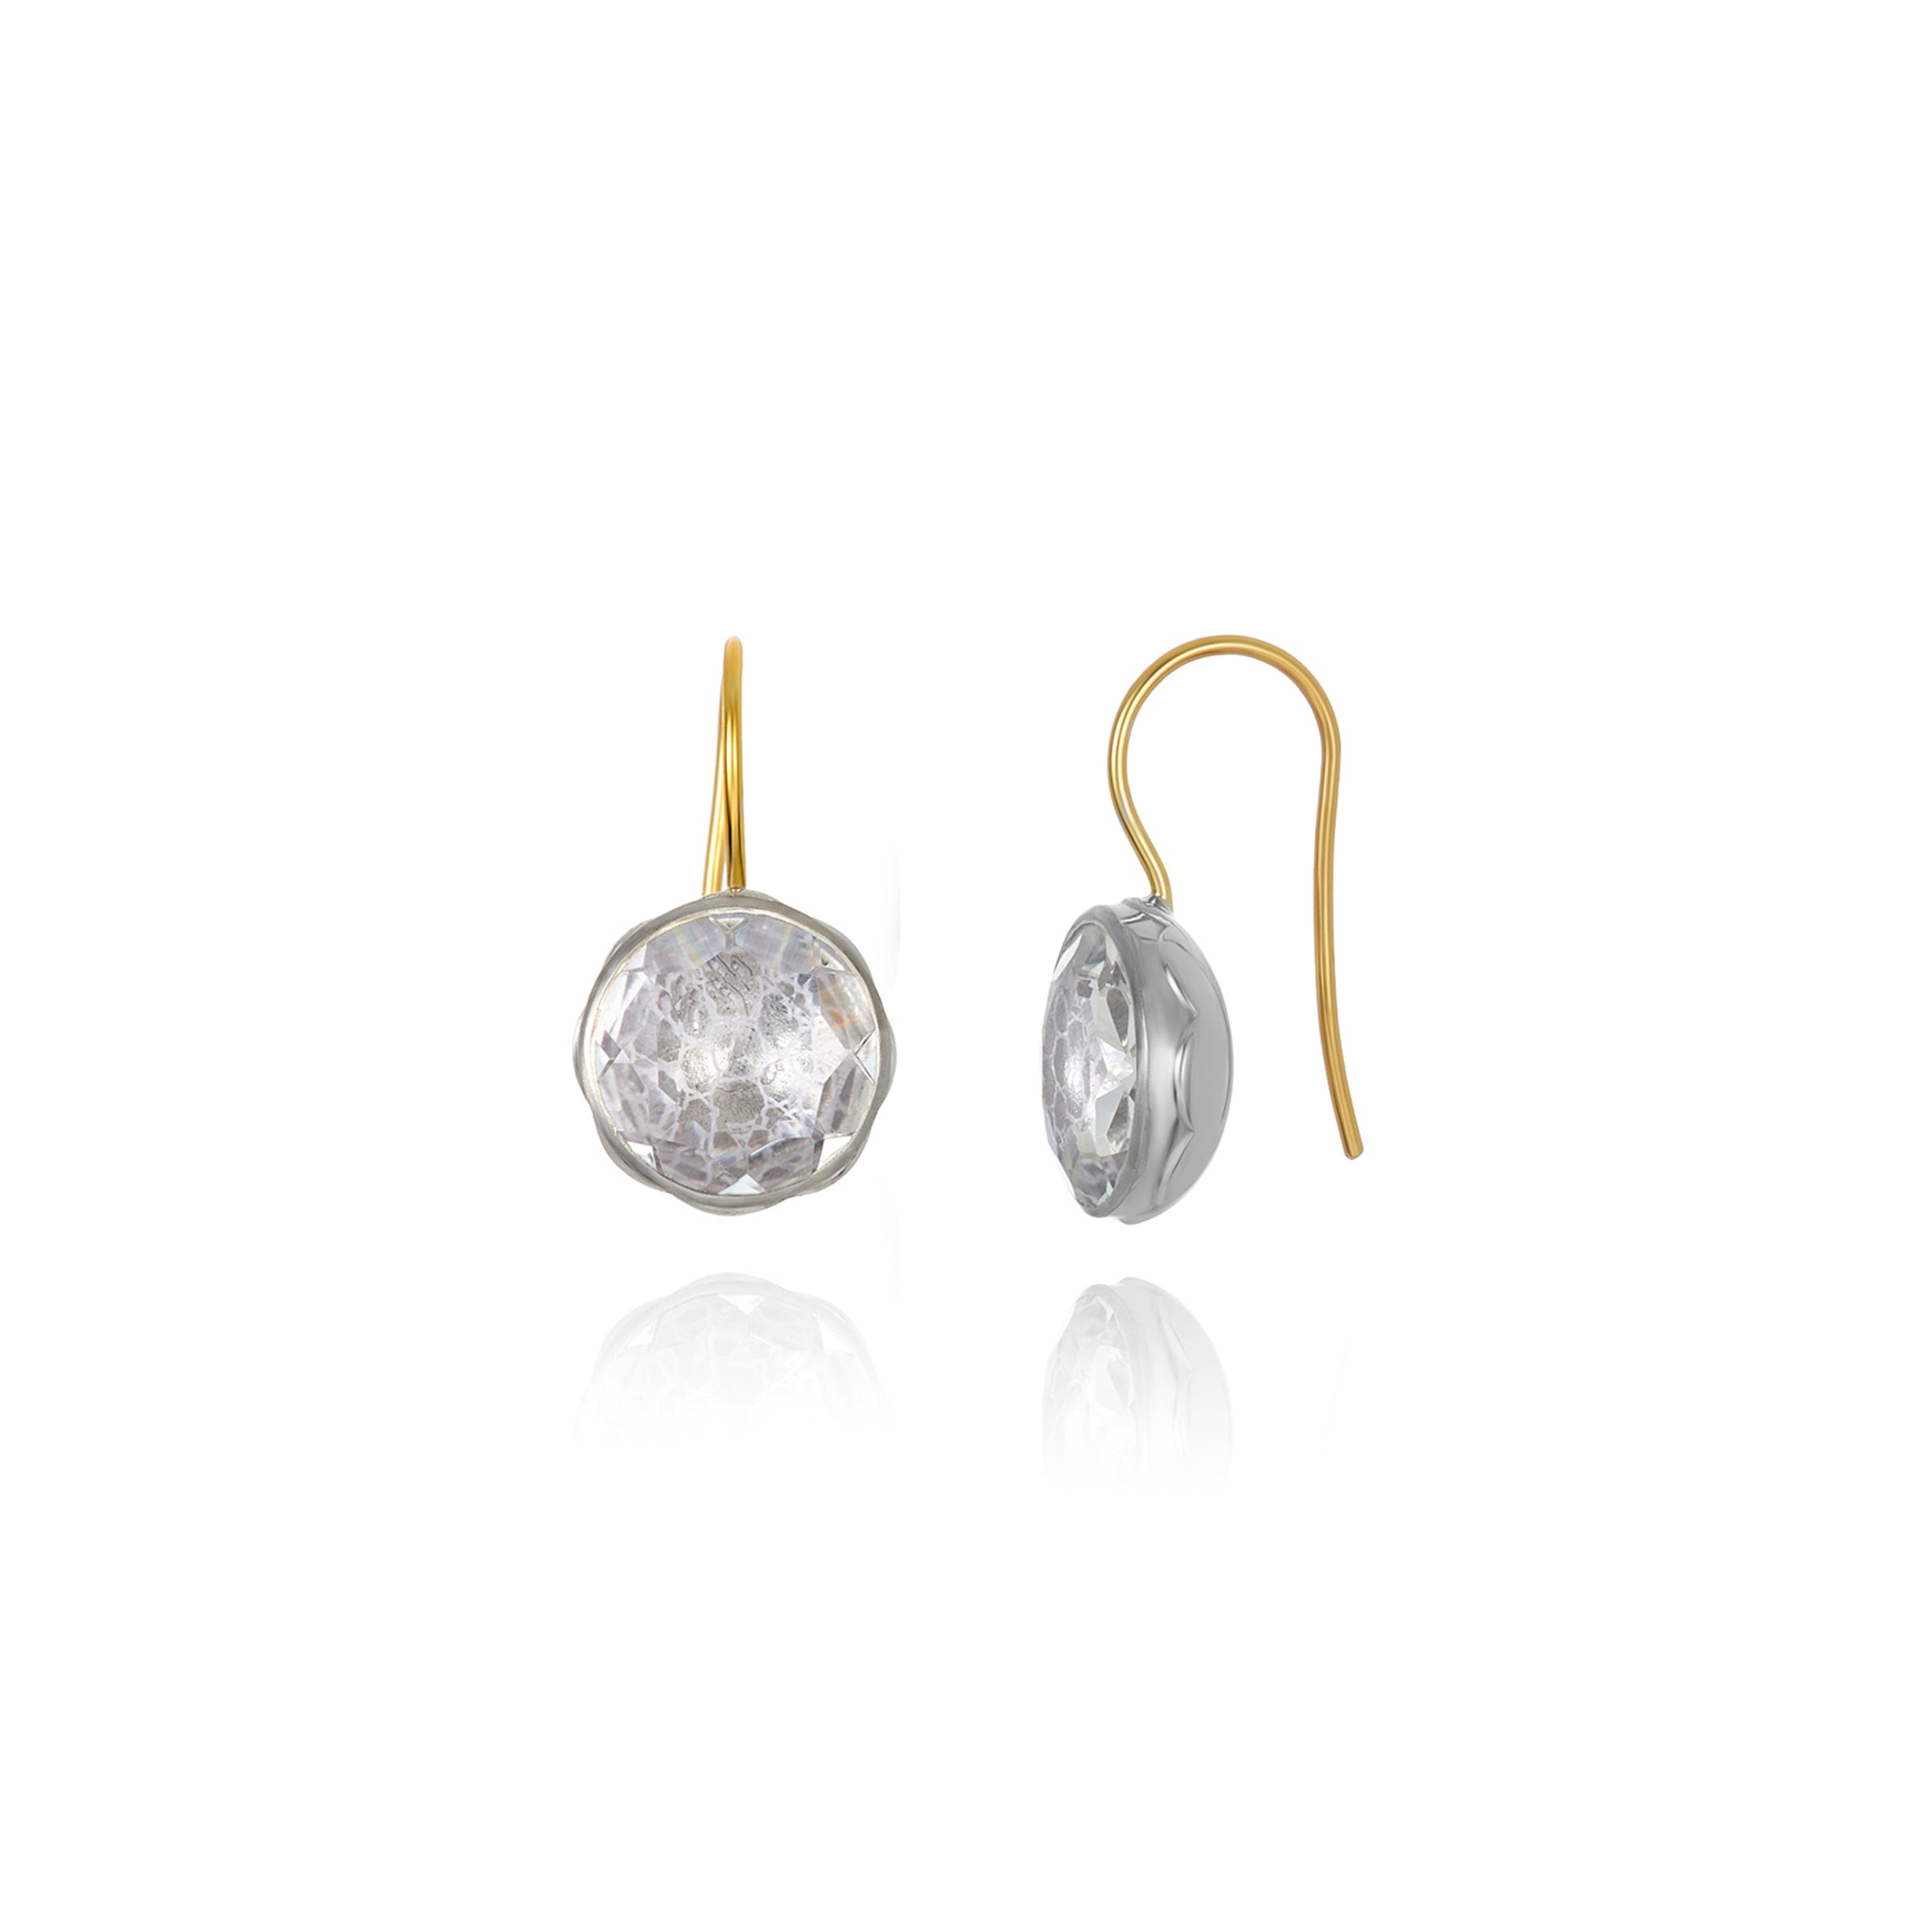 L&H Bride Button Earrings in Veil (White Rhodium or Yellow Gold Wash)